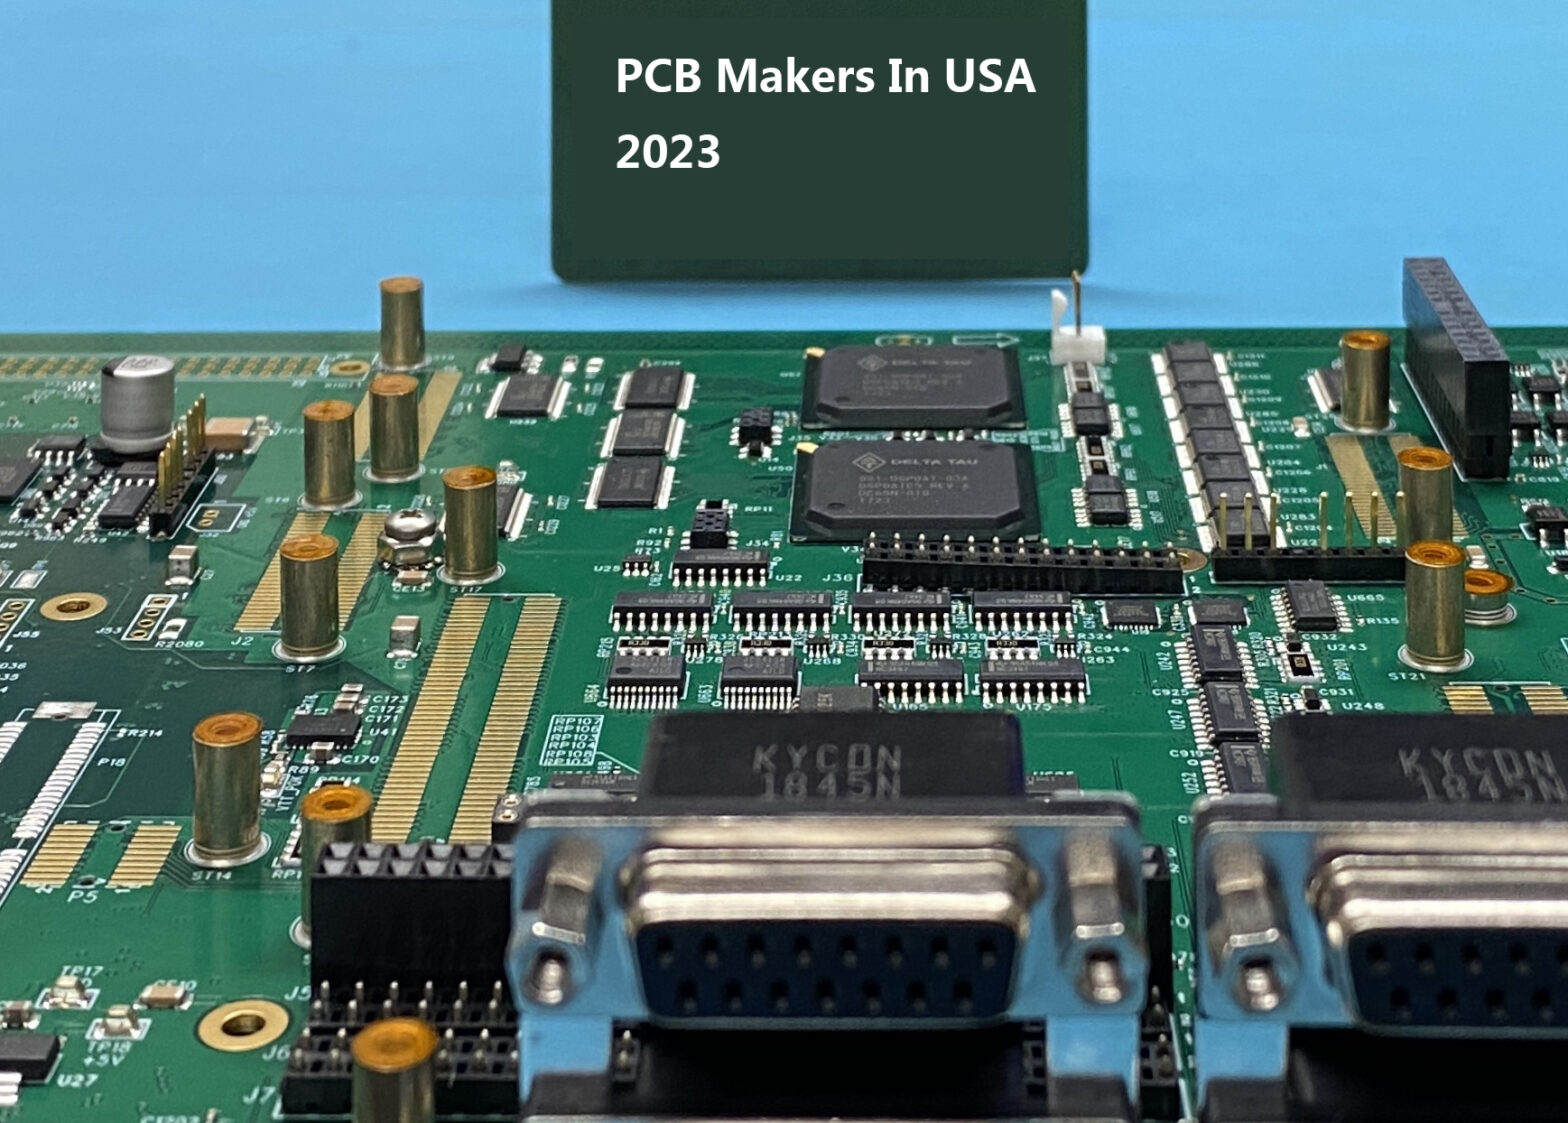 PCB Makers In USA - A Comprehensive List of Us Companies